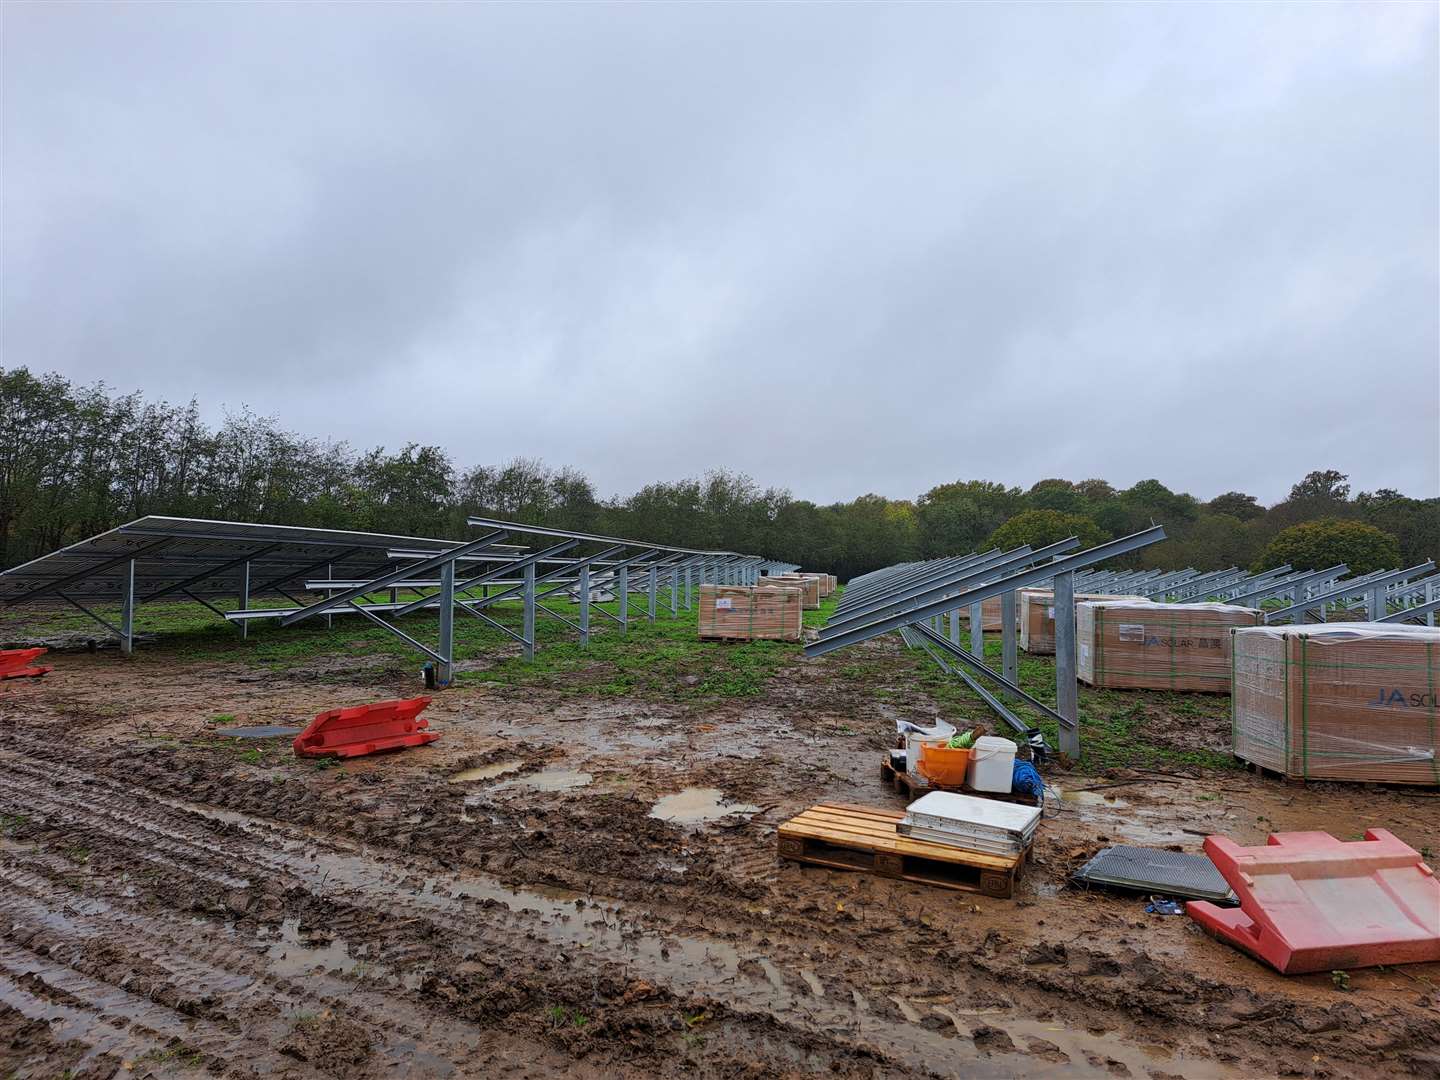 The site will ultimately generate 7% of KCC's electricity needs